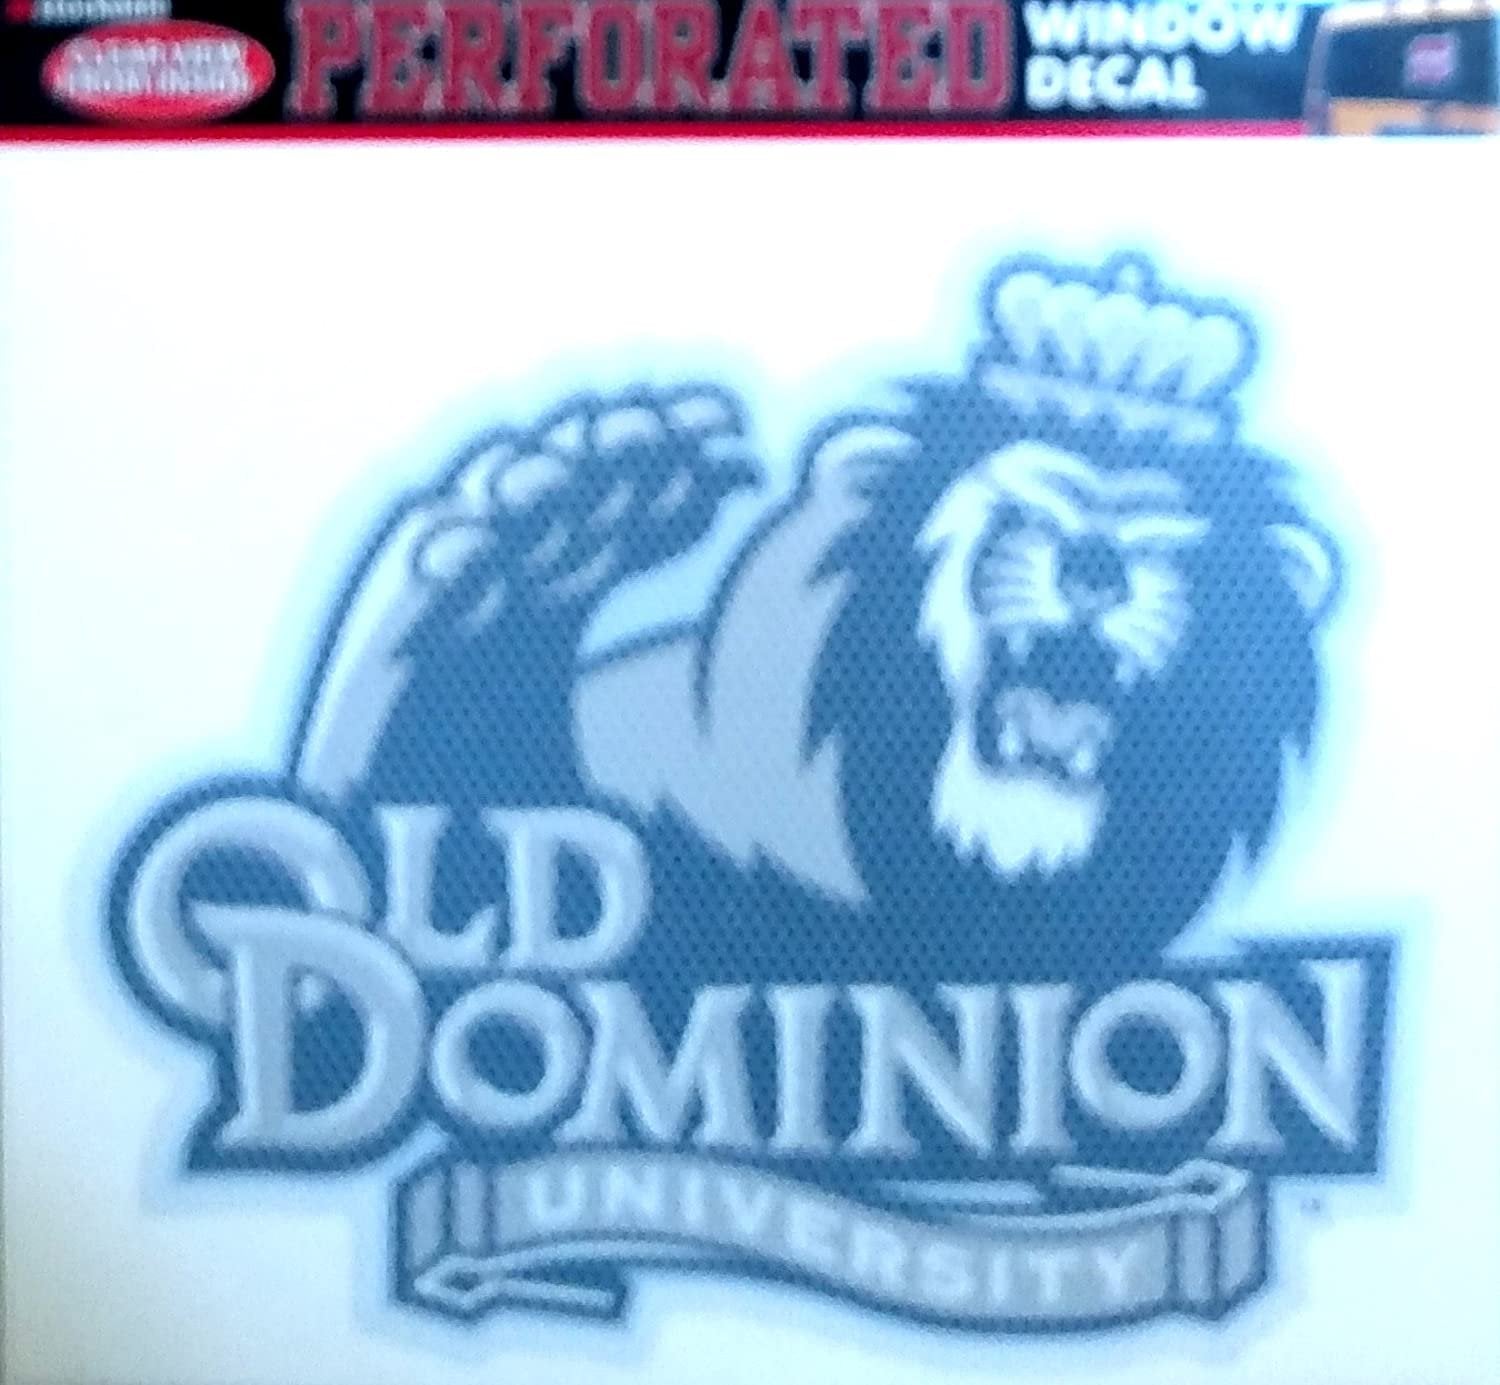 Old Dominion University Monarchs 8 Inch Preforated Window Film Decal Sticker, One-Way Vision, Adhesive Backing